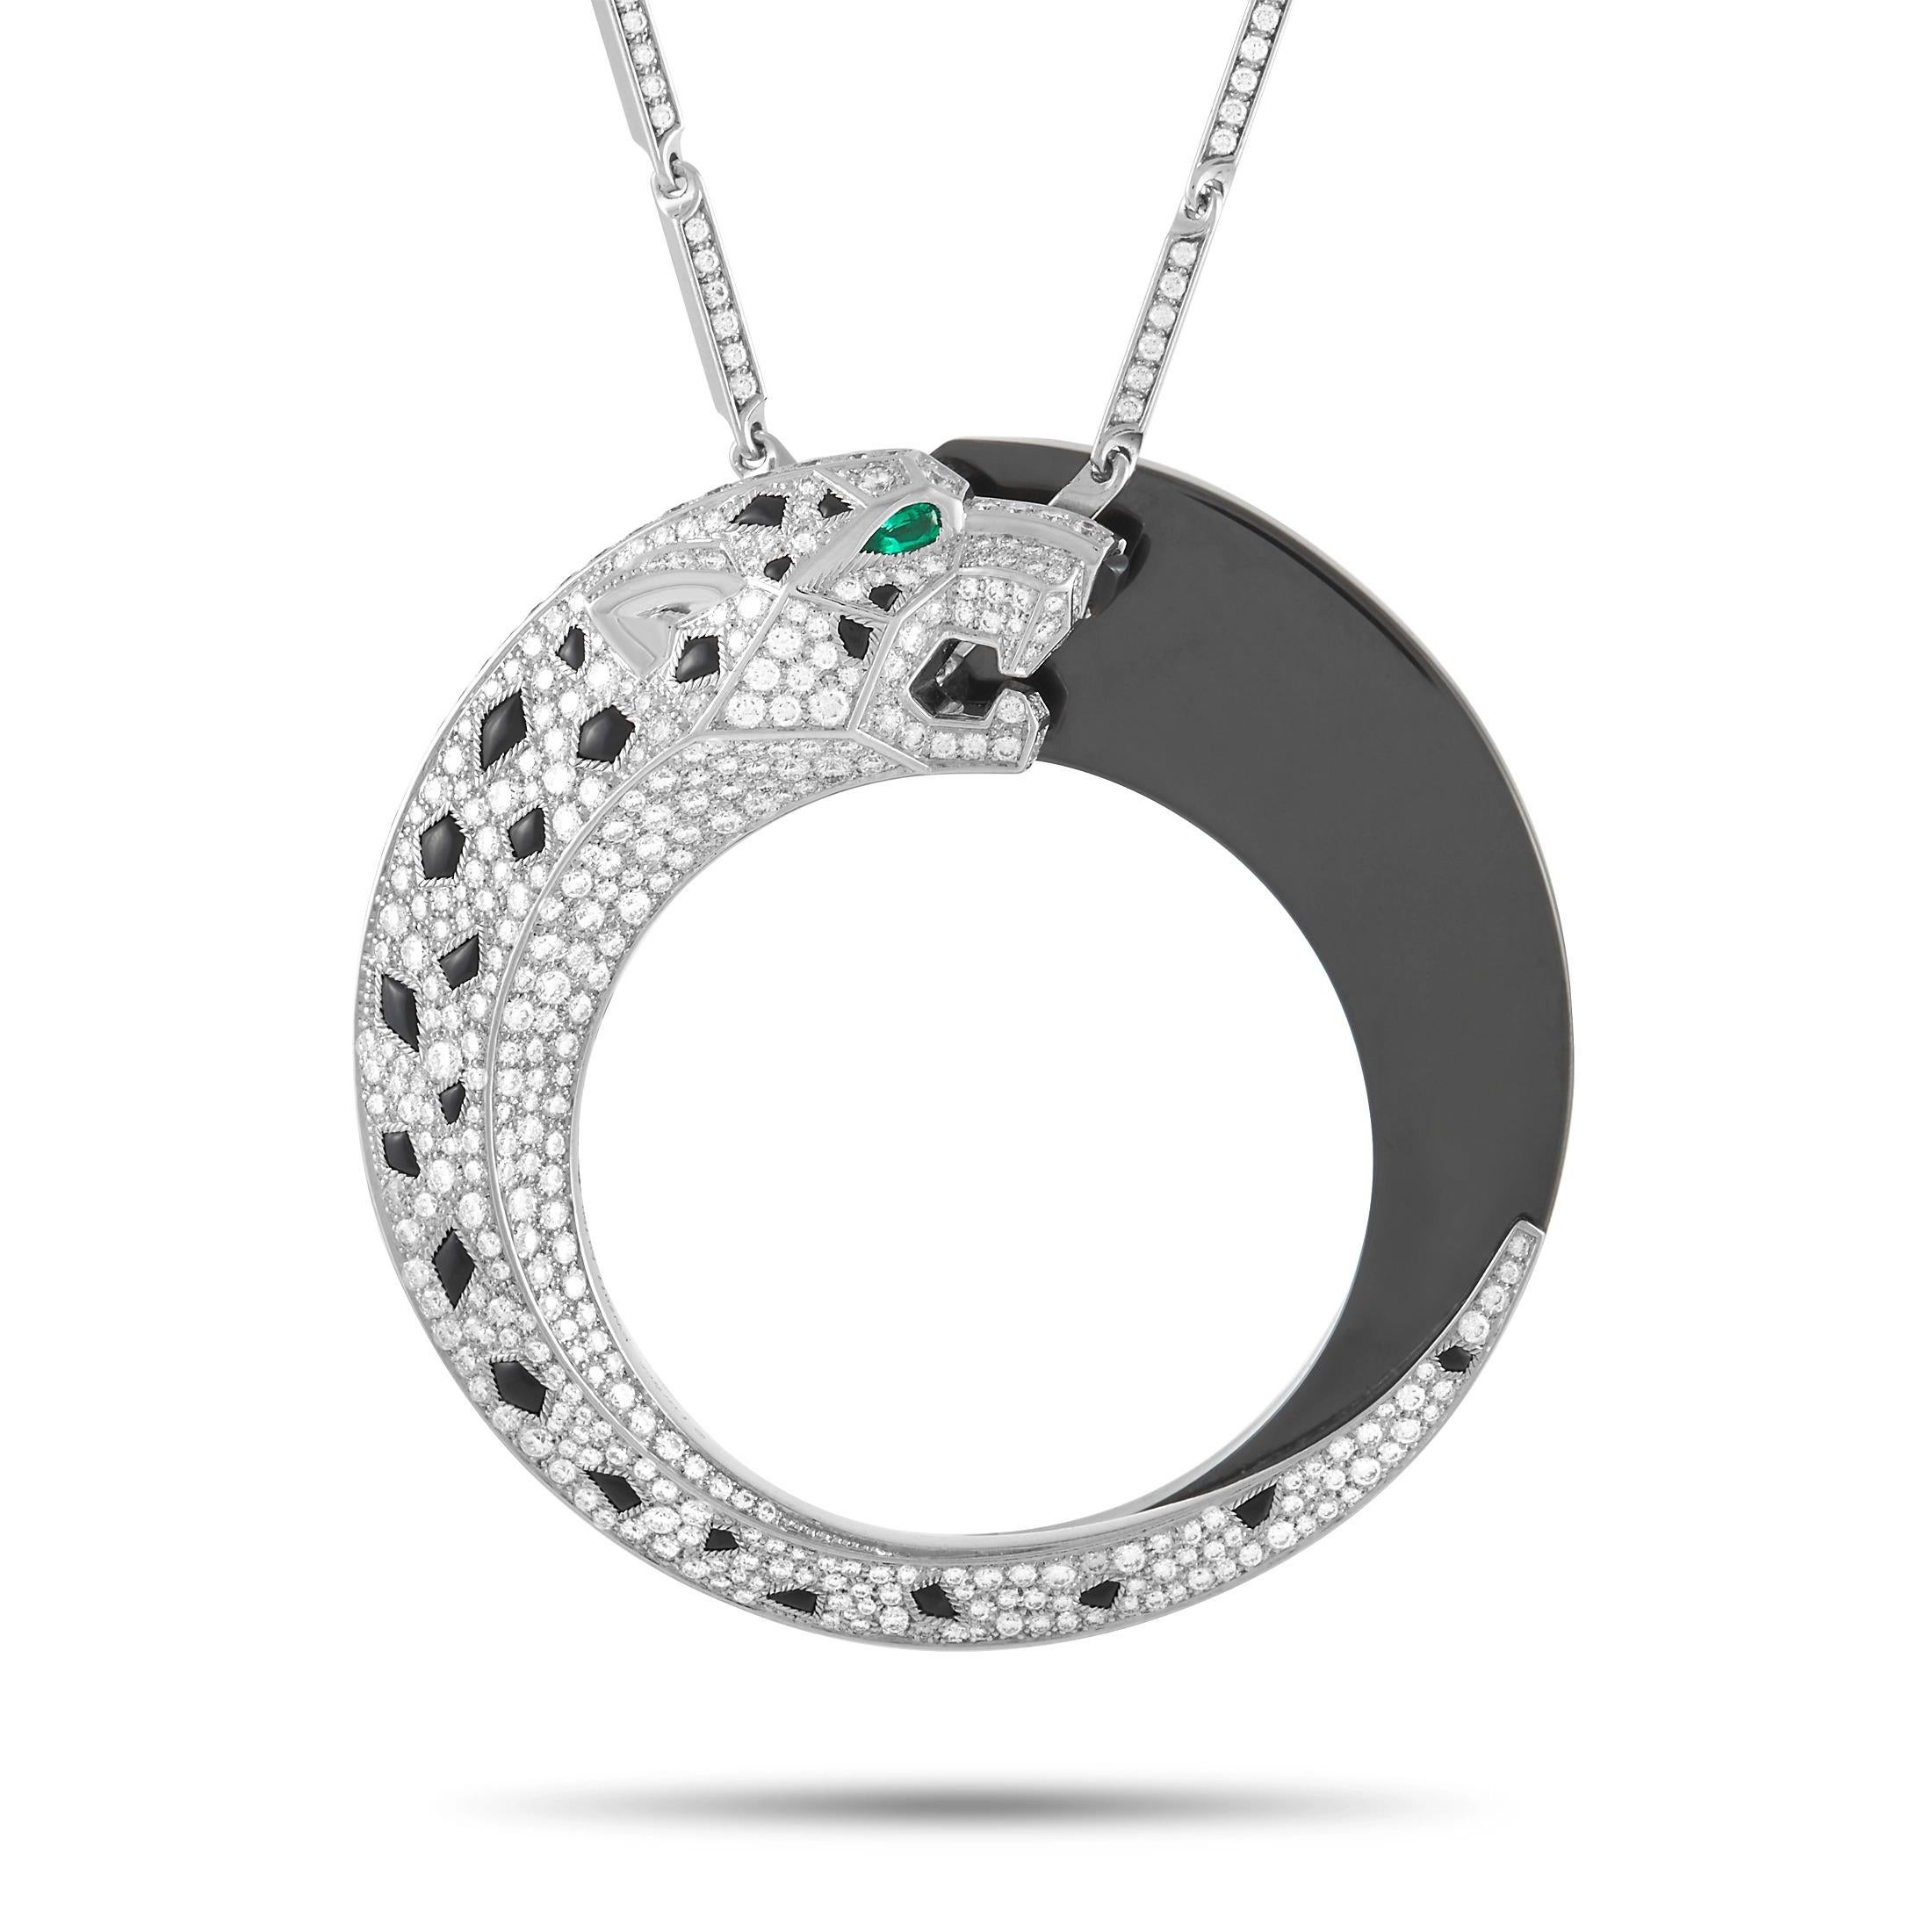 This Cartier necklace from the Panthère de Cartier collection is a stunning piece that is sure to turn heads. Crafted from 18K white gold, the necklace features a bold panthère pendant, made from 18K white gold and black ceramic. The pendant is set